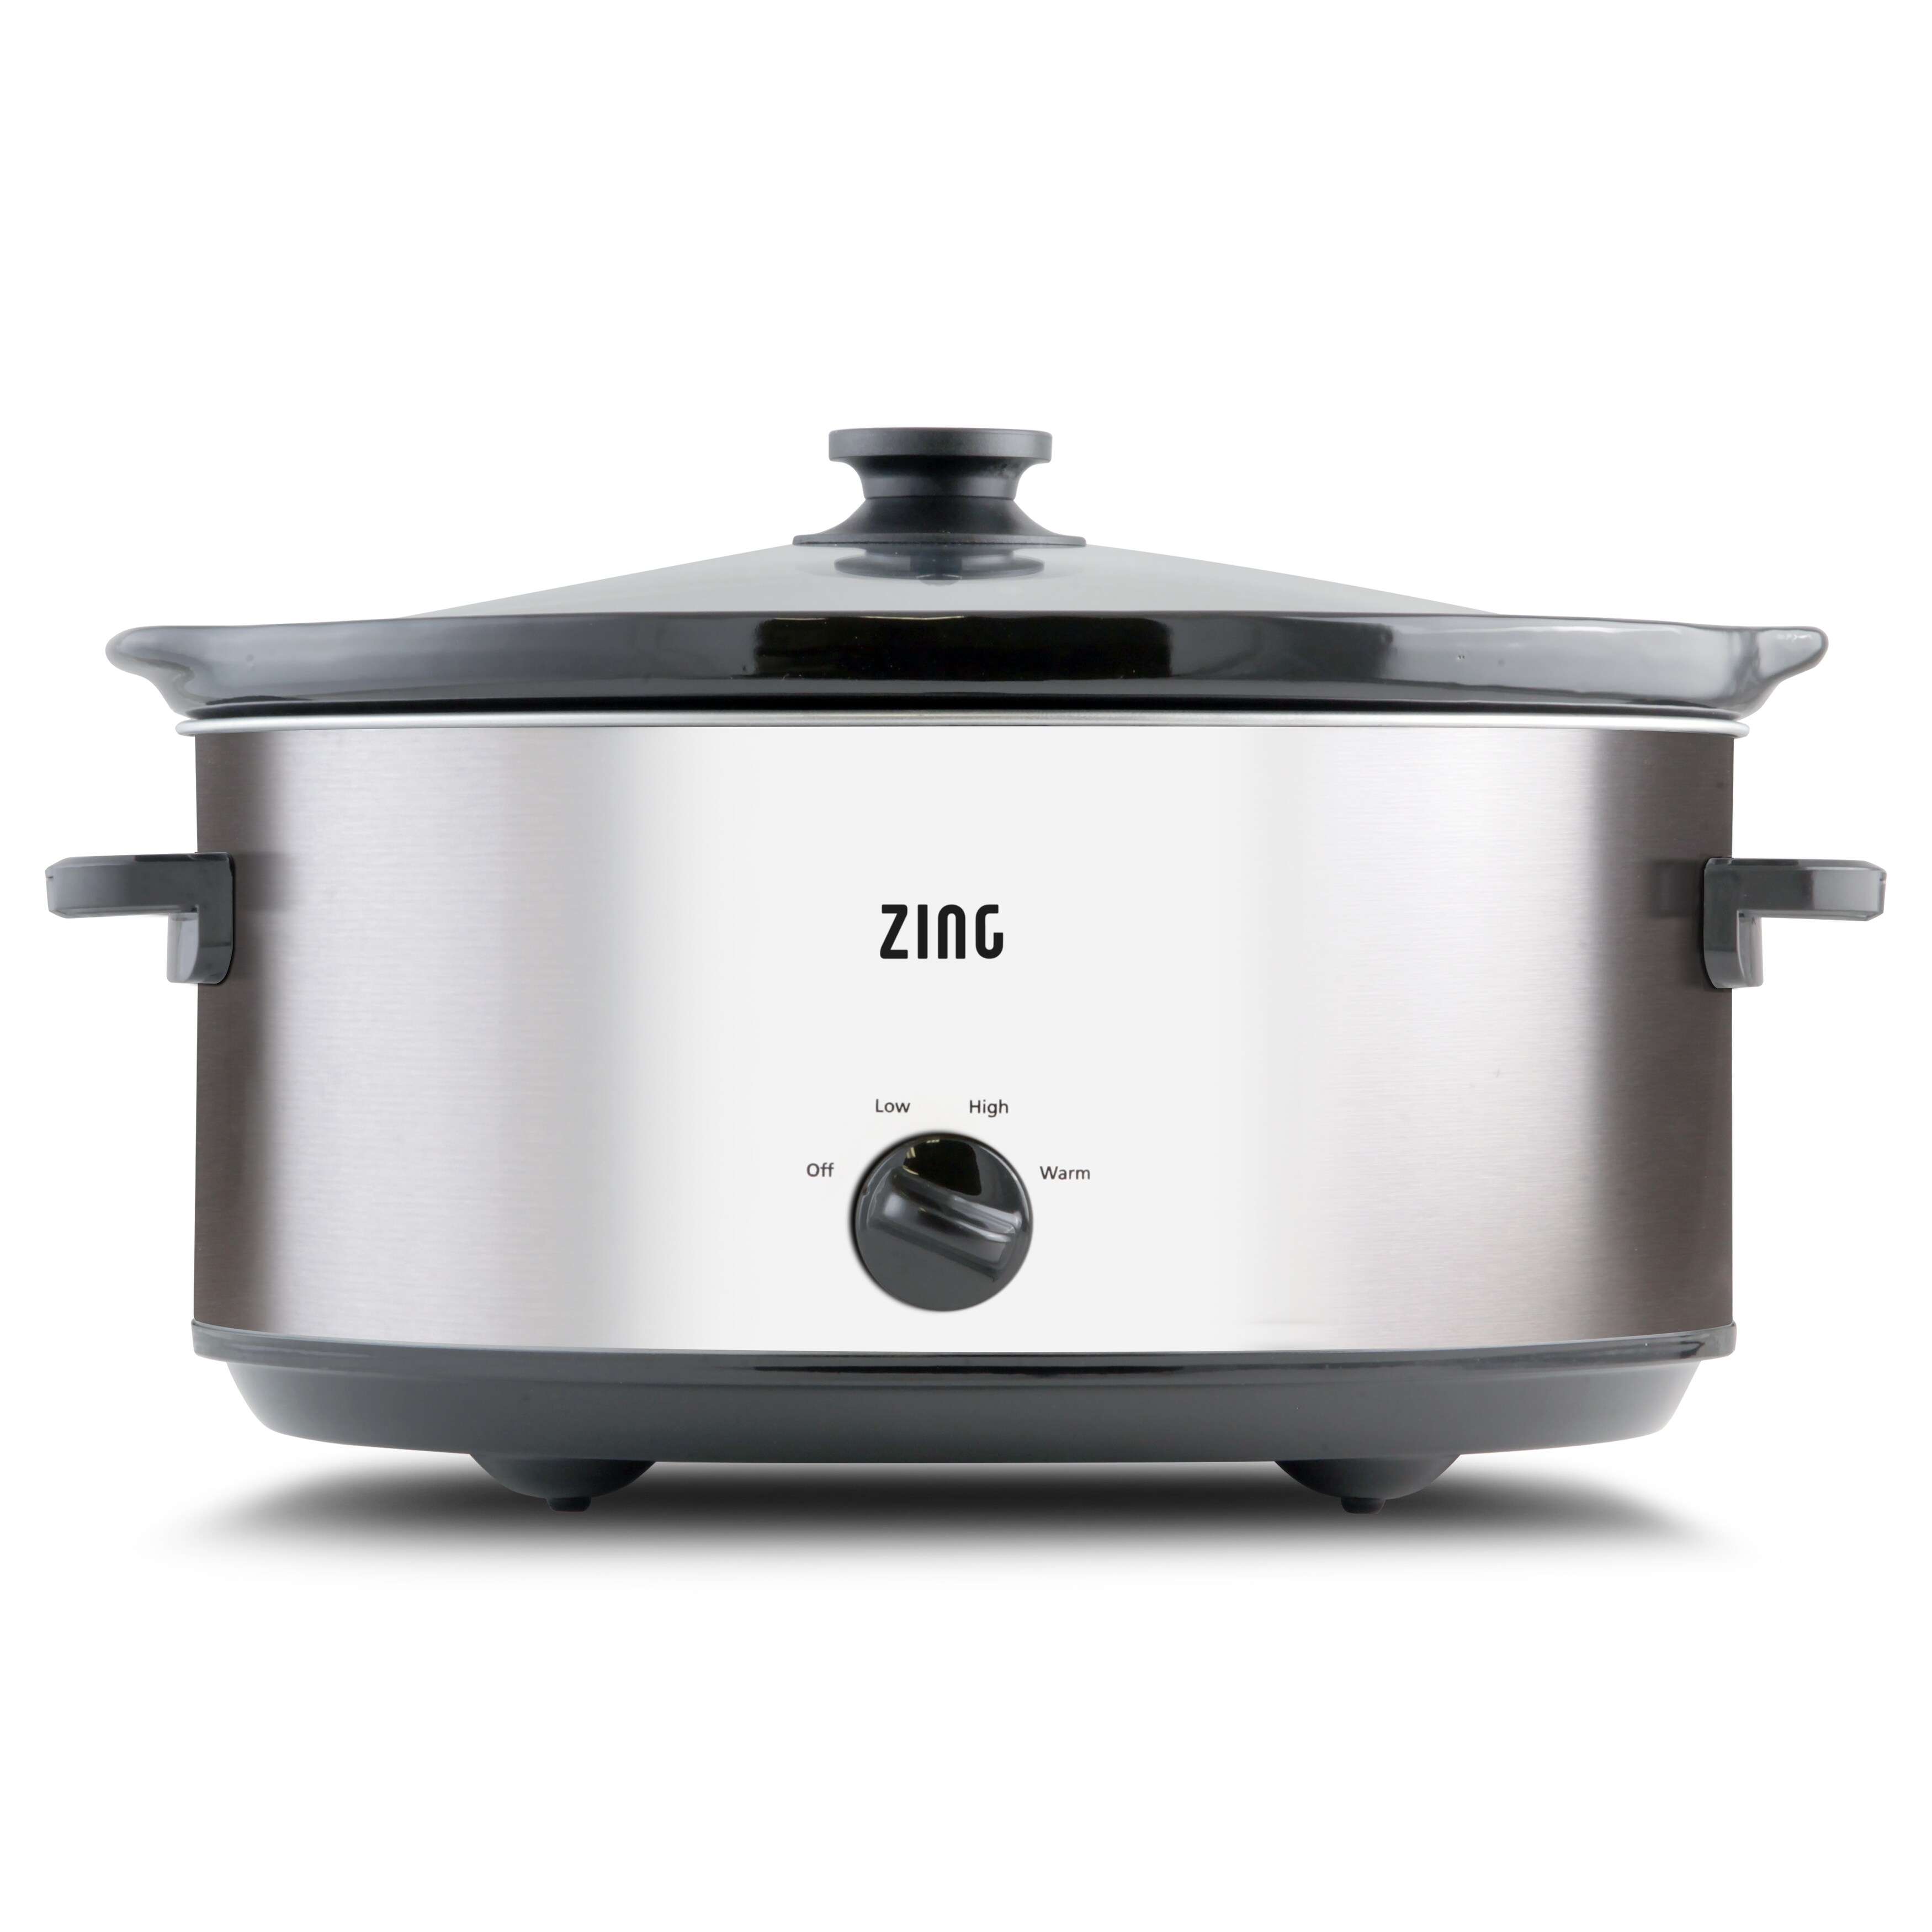 https://ak1.ostkcdn.com/images/products/is/images/direct/a45fcc0425f0ba231e0d436ea35fb46f5ea0713e/Zing-7-Quart-Manual-Oval-Slow-Cooker.jpg